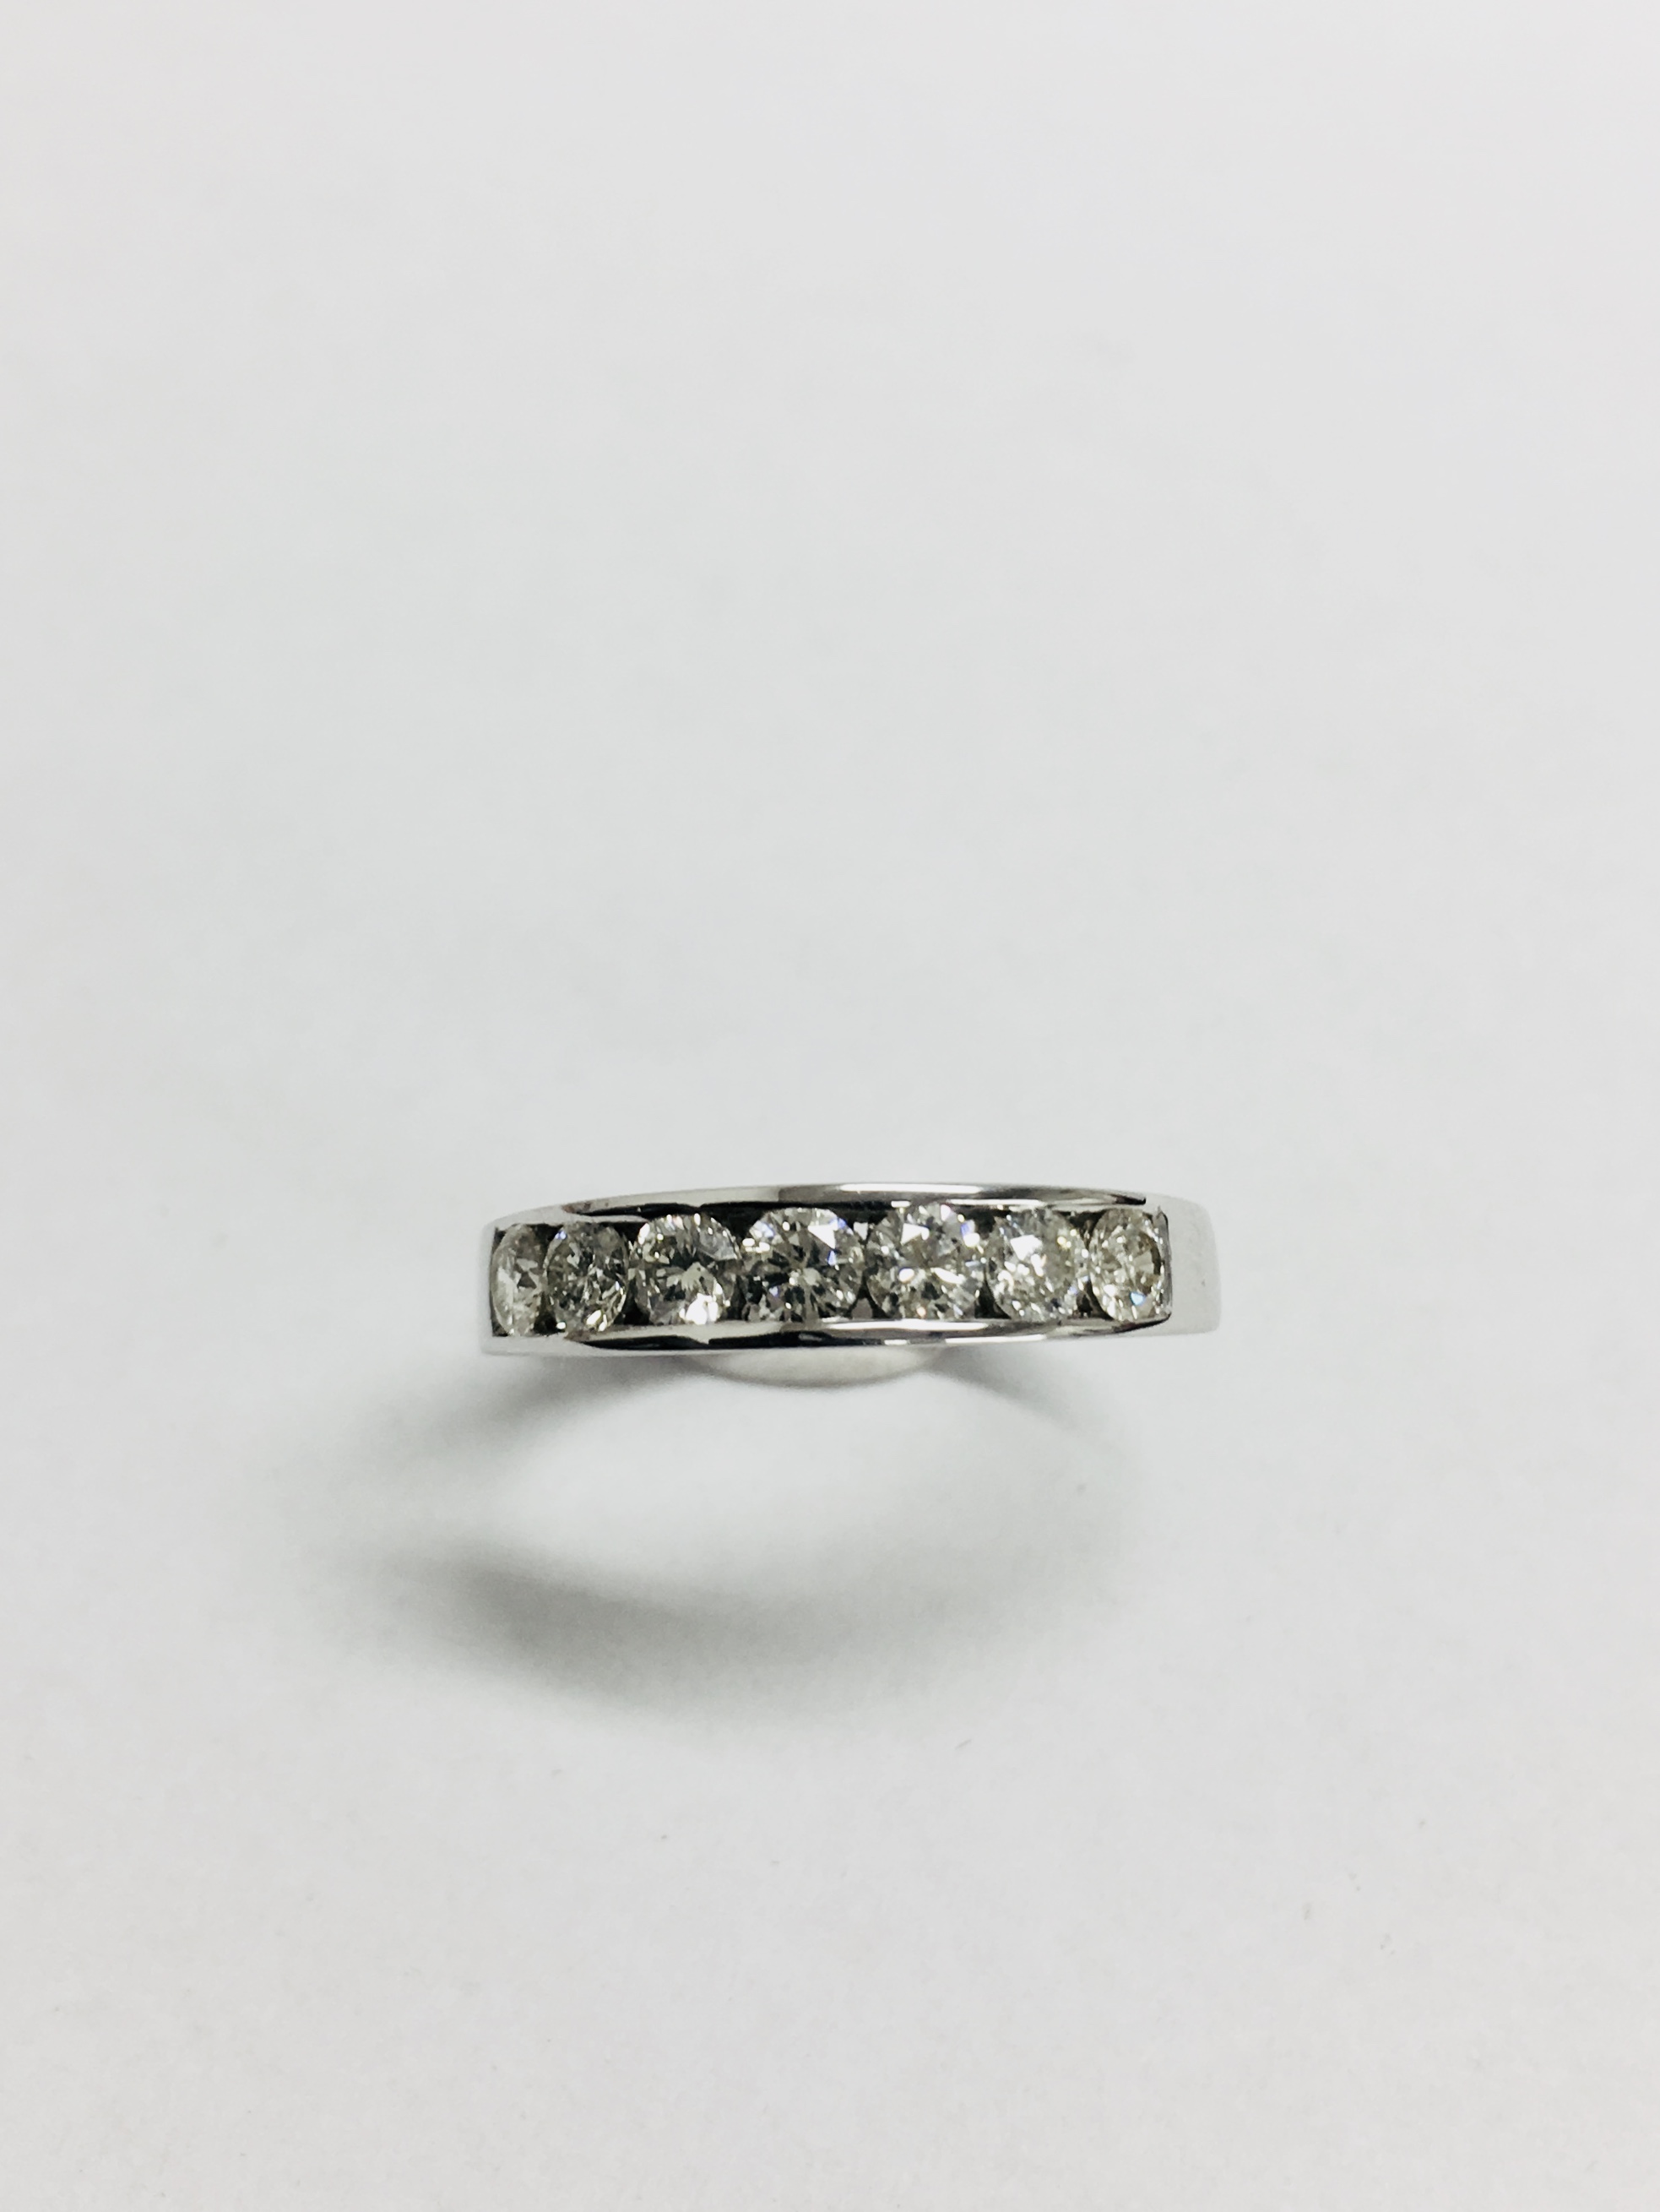 0.70Ct Diamond Band Ring Set With 7 Brilliant Cut Diamonds In A Channel Setting. - Image 5 of 7